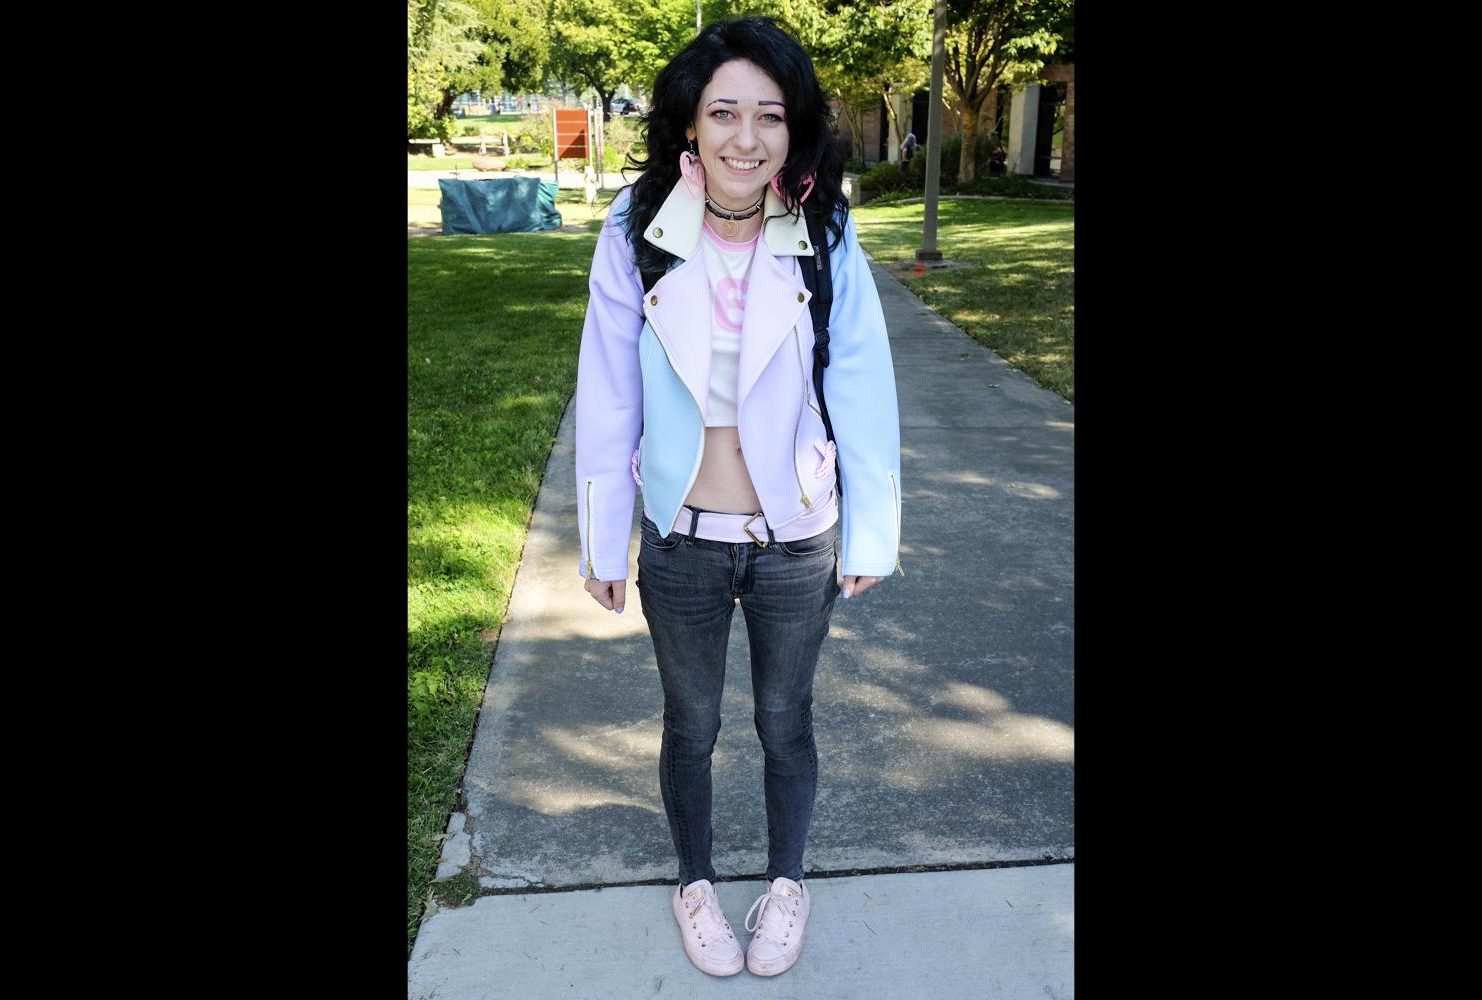 Psychology major, Julia Dimant wears a bright blue and pink jacket and pink shoes with pink earrings at American River College on Aug. 28. “I like the unique clothing styles and elegance [in anime] and it kind of stands out to me. It’s an inspiration,” Dimant said. (Photo by Patrick Hyun Wilson)